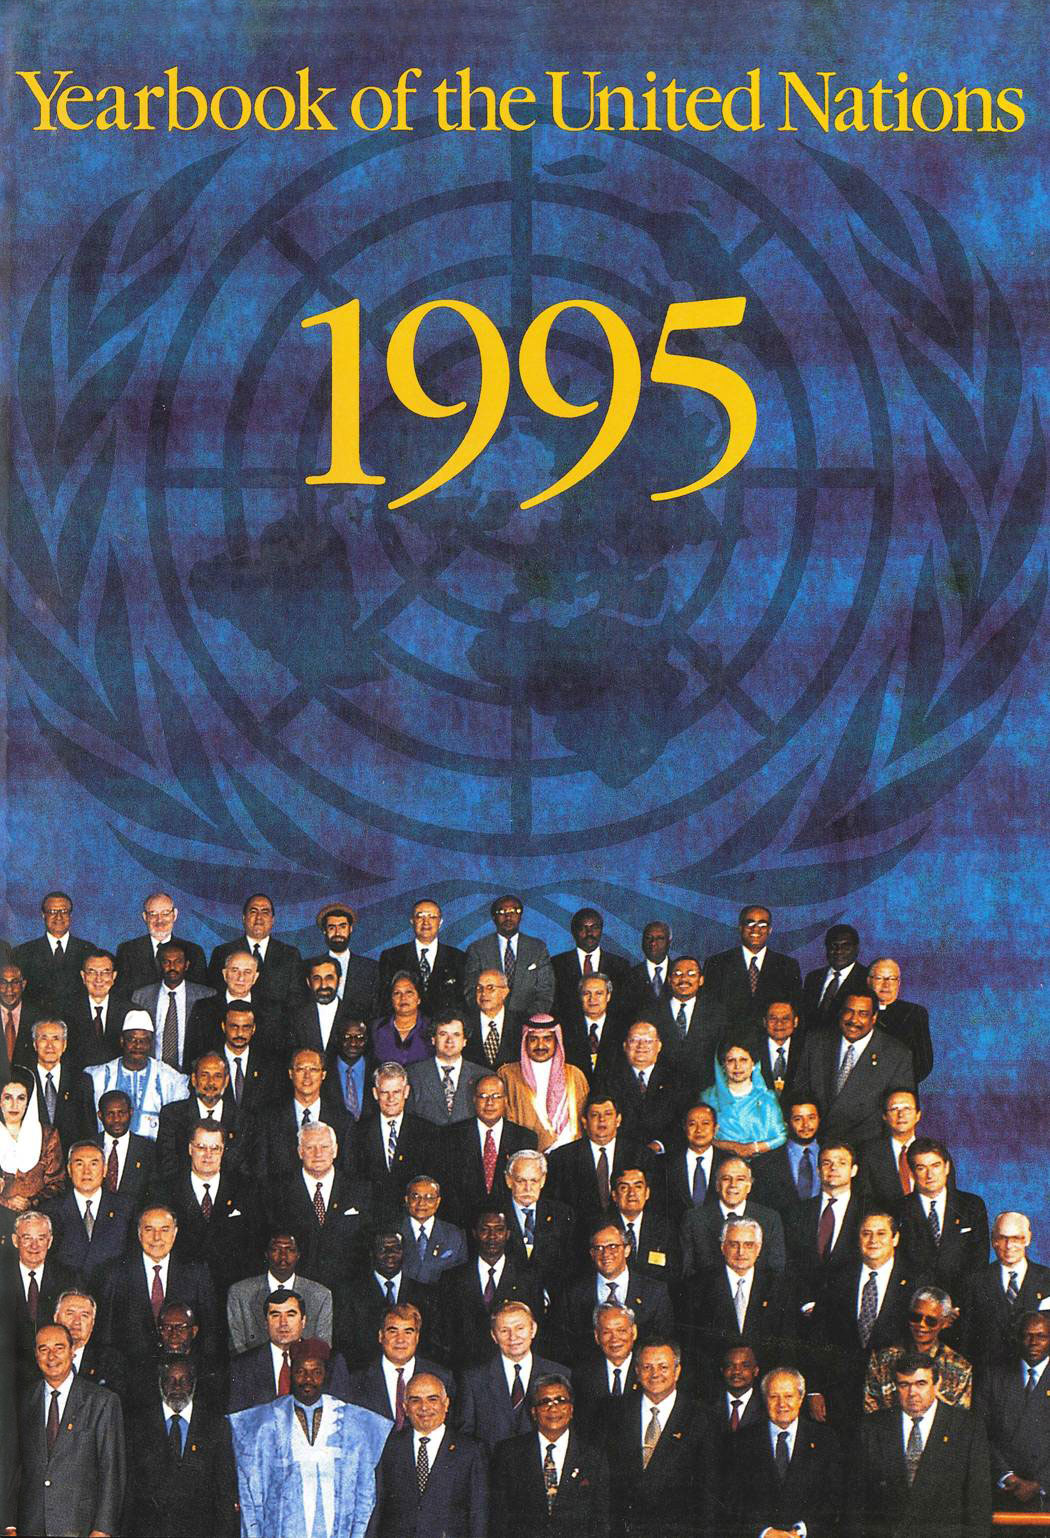 image of Yearbook of the United Nations 1995